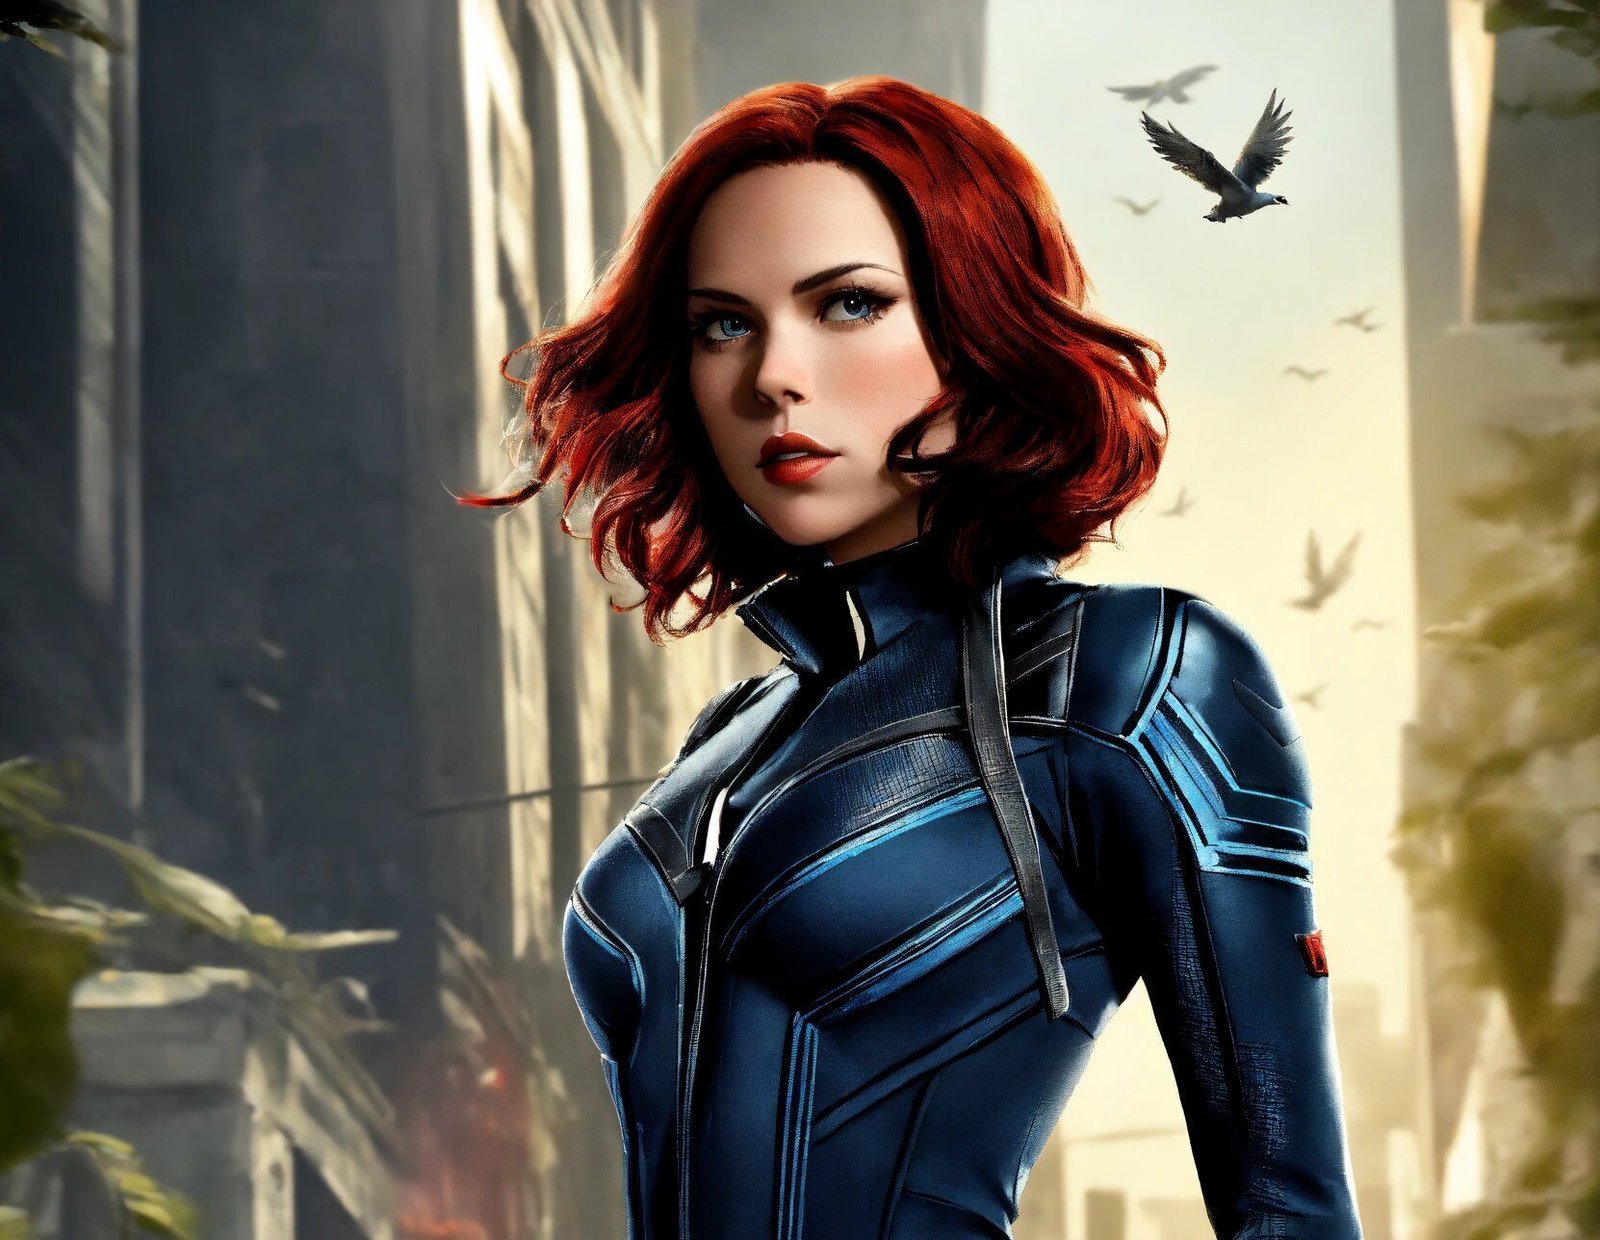 Black Widow's costume is a blend of nature and avi